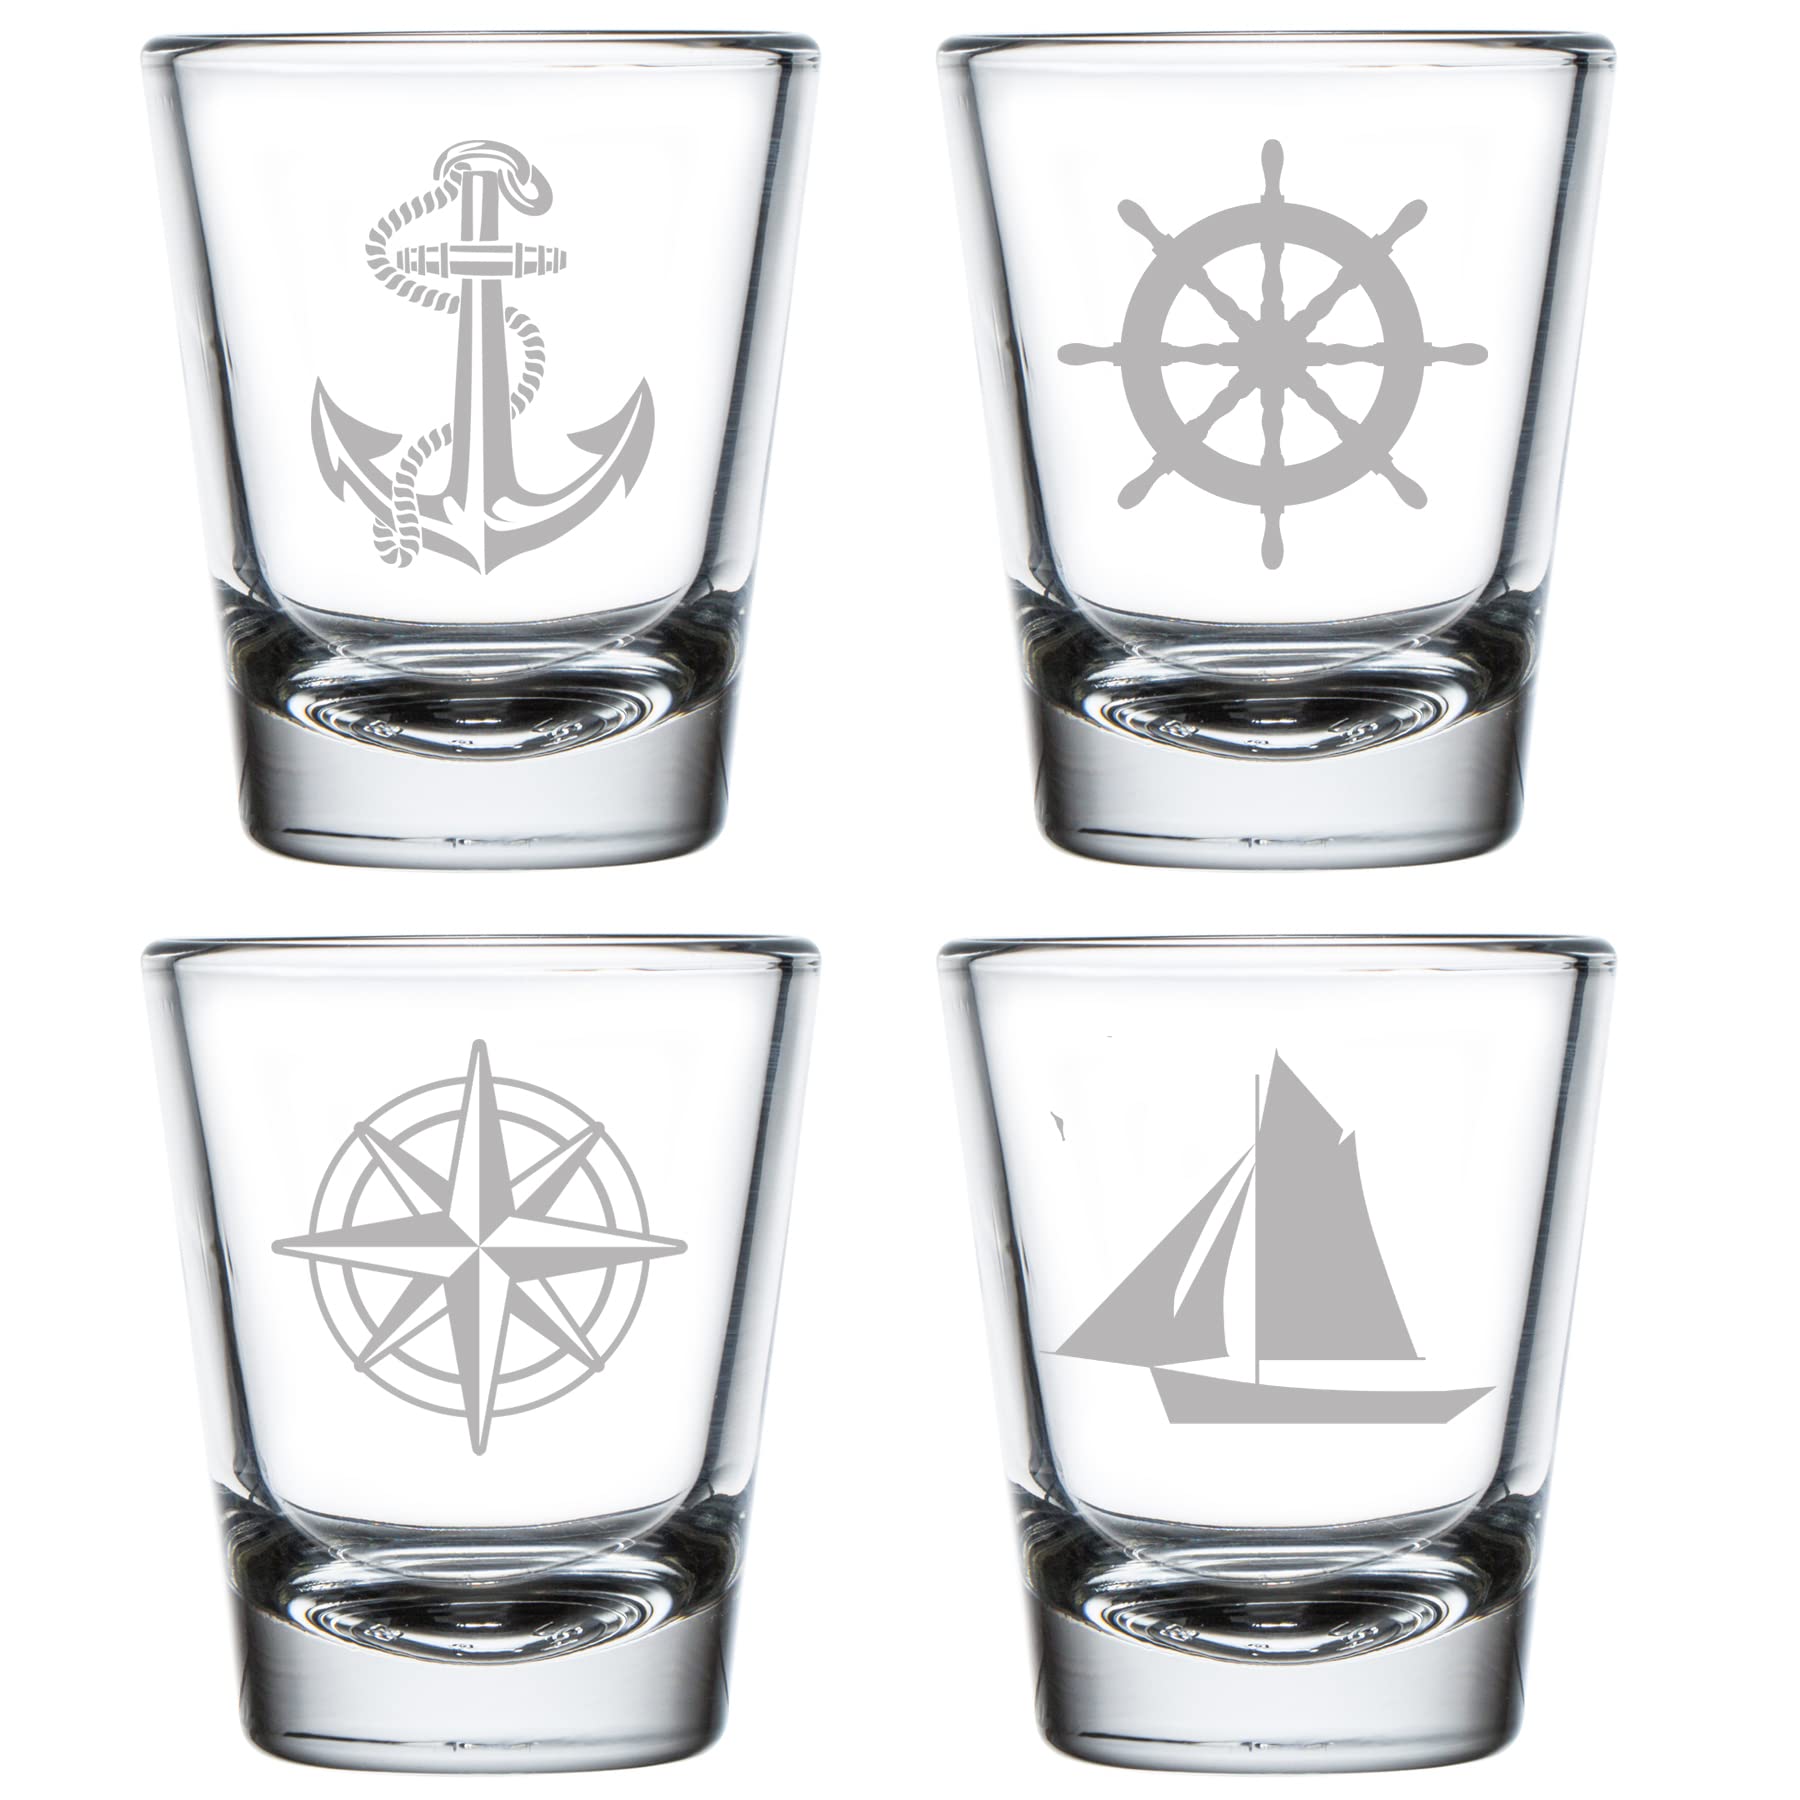 Set of 4 Shot Glasses 1.75oz Shot Glass Anchor Boat Compass Nautical Collection